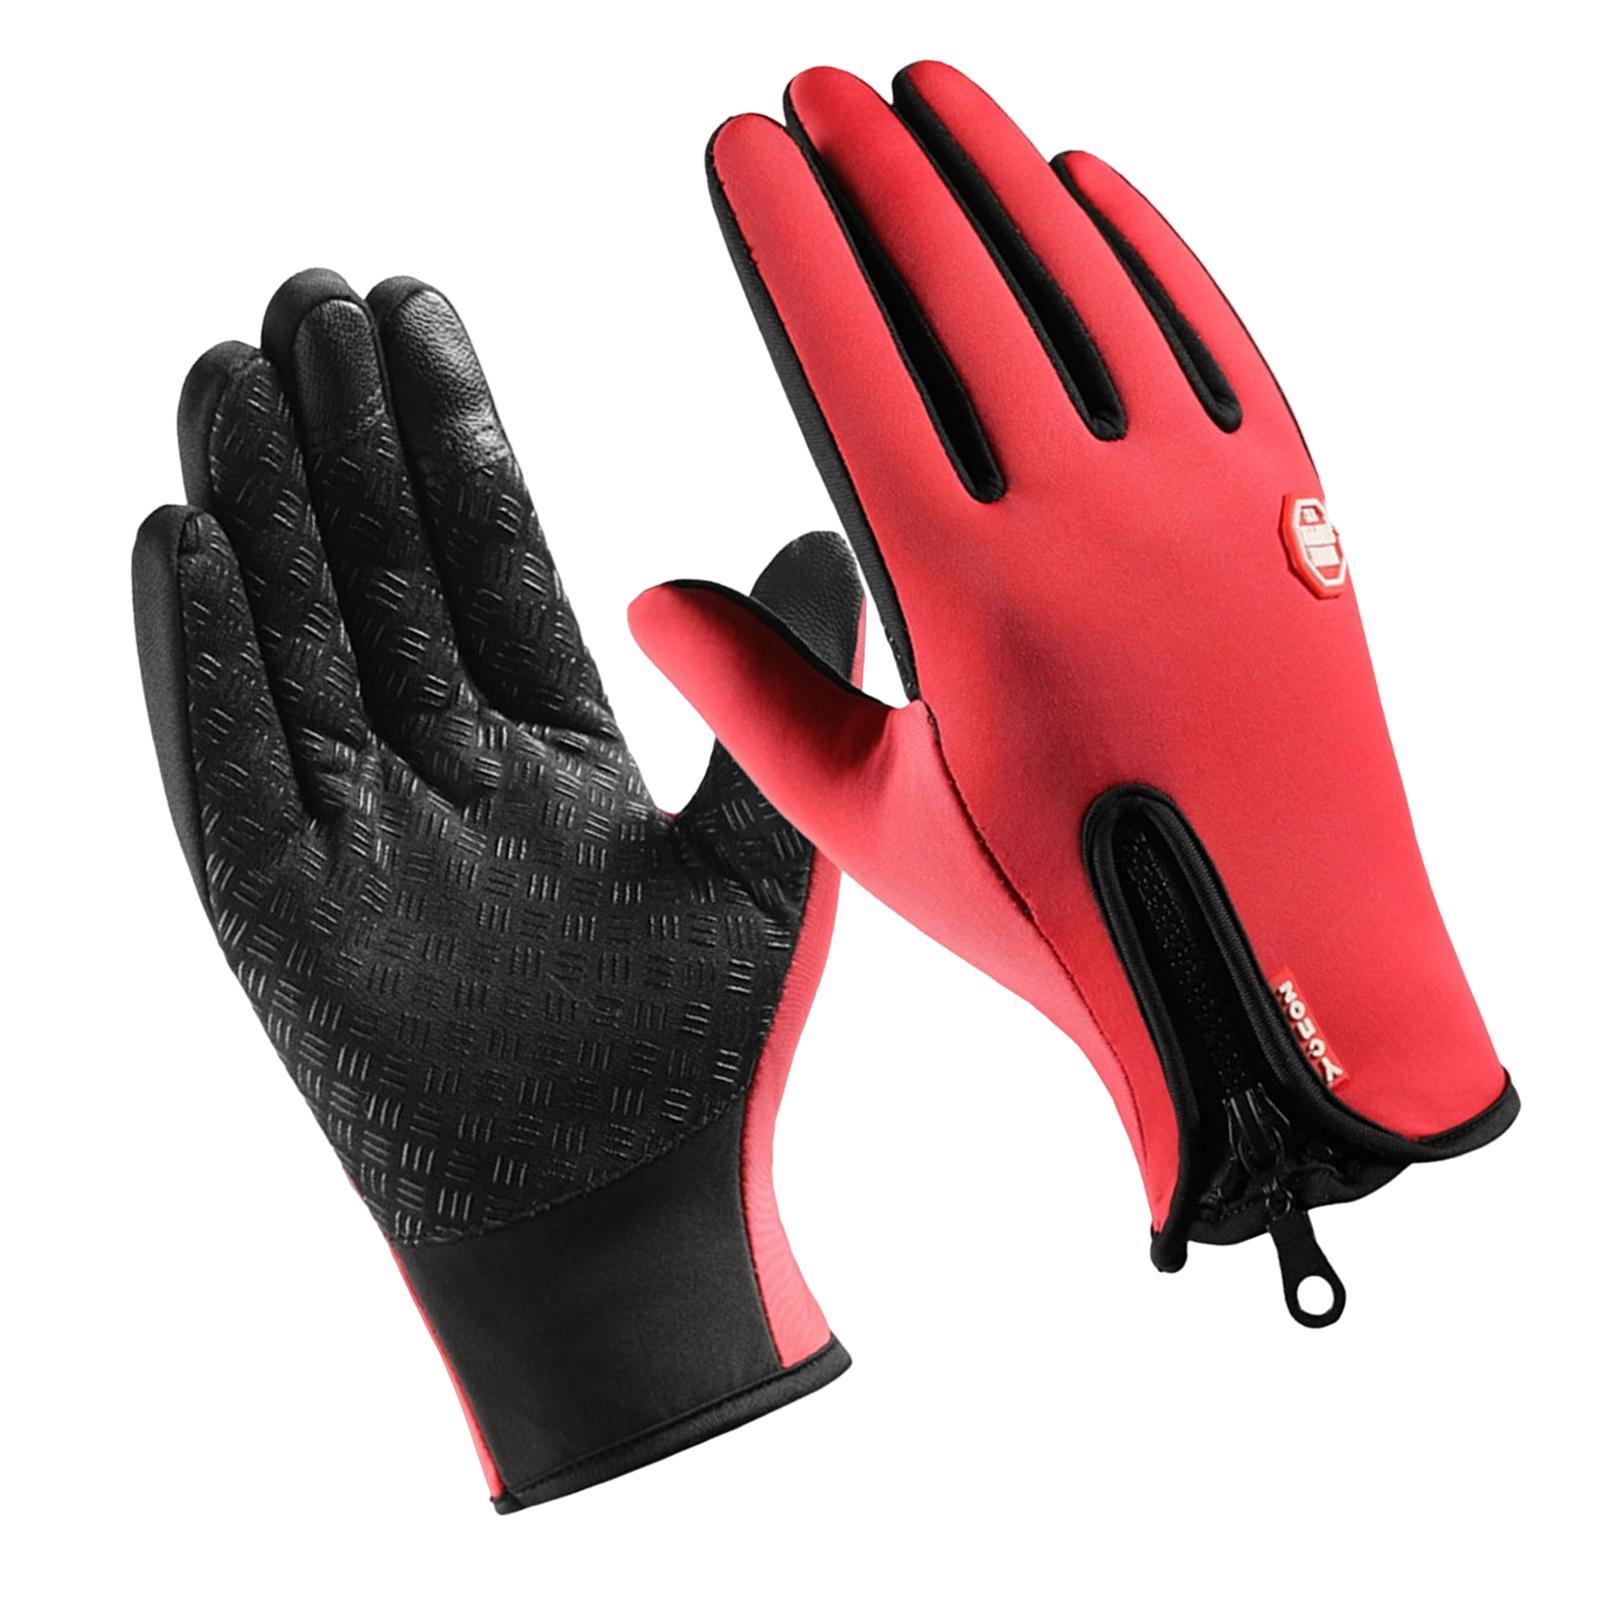 Winter Gloves Nonslip Thermal Gloves for Outdoor Running Sports Motorcycle XL Red